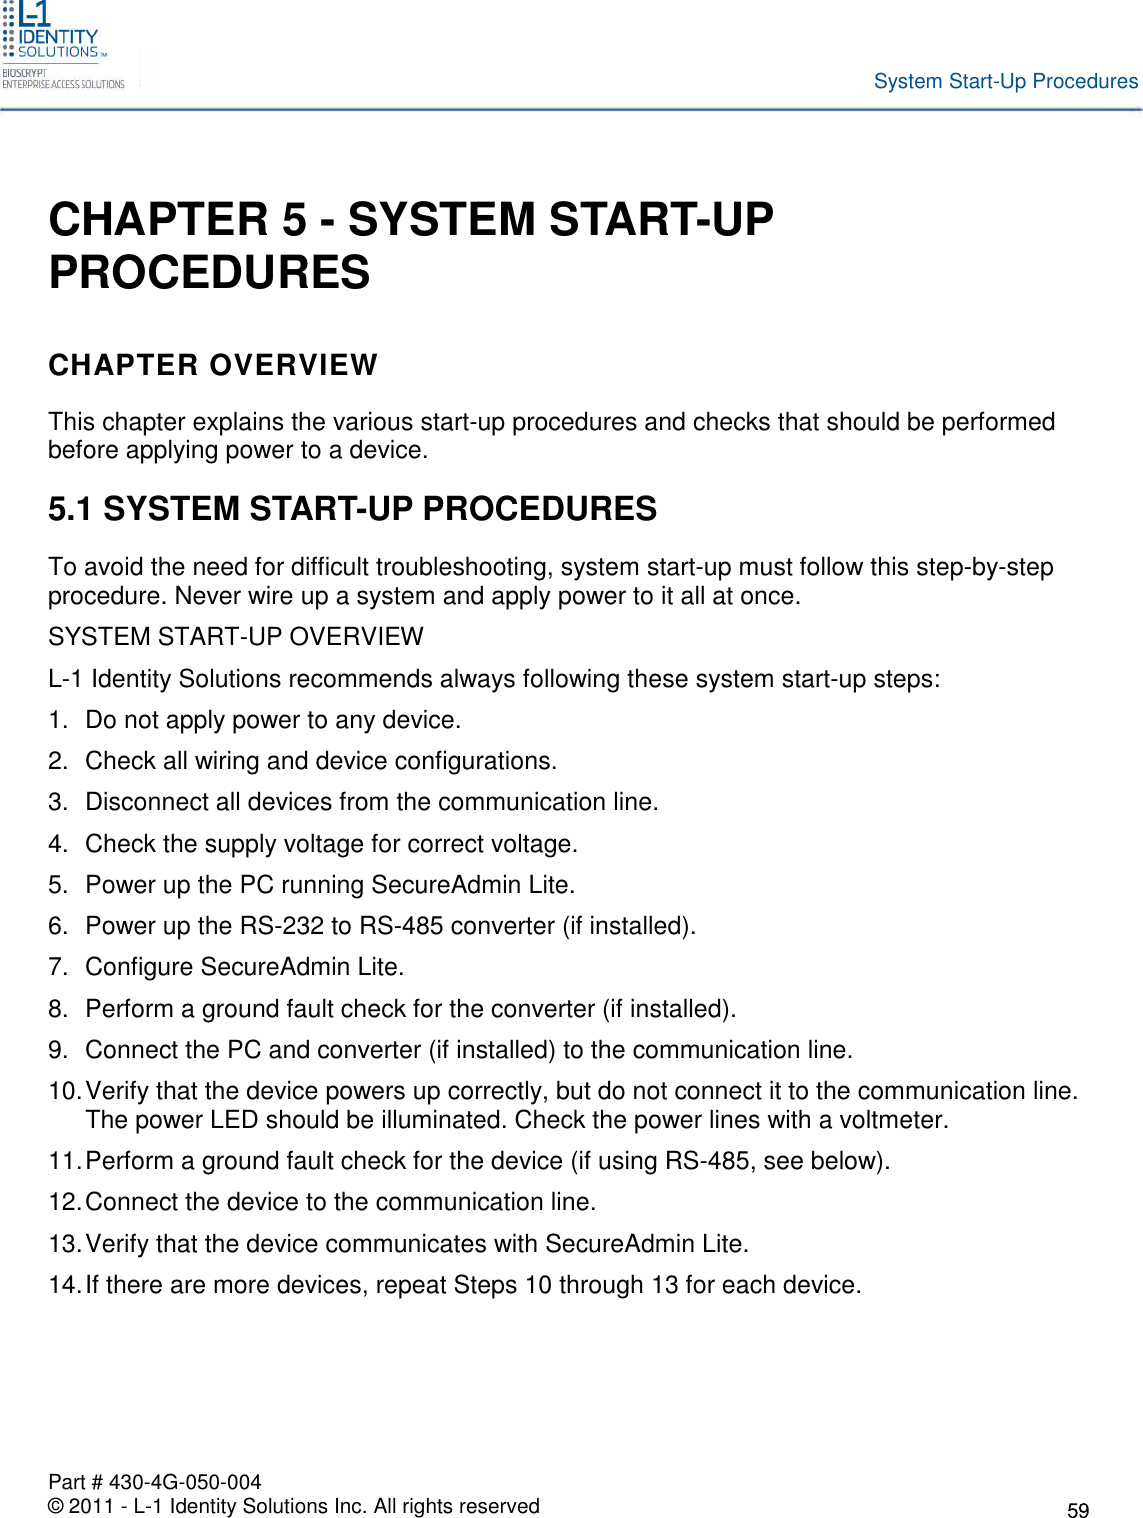 Part # 430-4G-050-004© 2011 - L-1 Identity Solutions Inc. All rights reservedSystem Start-Up ProceduresCHAPTER 5 - SYSTEM START-UPPROCEDURESCHAPTER OVERVIEWThis chapter explains the various start-up procedures and checks that should be performedbefore applying power to a device.5.1 SYSTEM START-UP PROCEDURESTo avoid the need for difficult troubleshooting, system start-up must follow this step-by-stepprocedure. Never wire up a system and apply power to it all at once.SYSTEM START-UP OVERVIEWL-1 Identity Solutions recommends always following these system start-up steps:1. Do not apply power to any device.2. Check all wiring and device configurations.3. Disconnect all devices from the communication line.4. Check the supply voltage for correct voltage.5. Power up the PC running SecureAdmin Lite.6. Power up the RS-232 to RS-485 converter (if installed).7. Configure SecureAdmin Lite.8. Perform a ground fault check for the converter (if installed).9. Connect the PC and converter (if installed) to the communication line.10.Verify that the device powers up correctly, but do not connect it to the communication line.The power LED should be illuminated. Check the power lines with a voltmeter.11.Perform a ground fault check for the device (if using RS-485, see below).12.Connect the device to the communication line.13.Verify that the device communicates with SecureAdmin Lite.14.If there are more devices, repeat Steps 10 through 13 for each device.